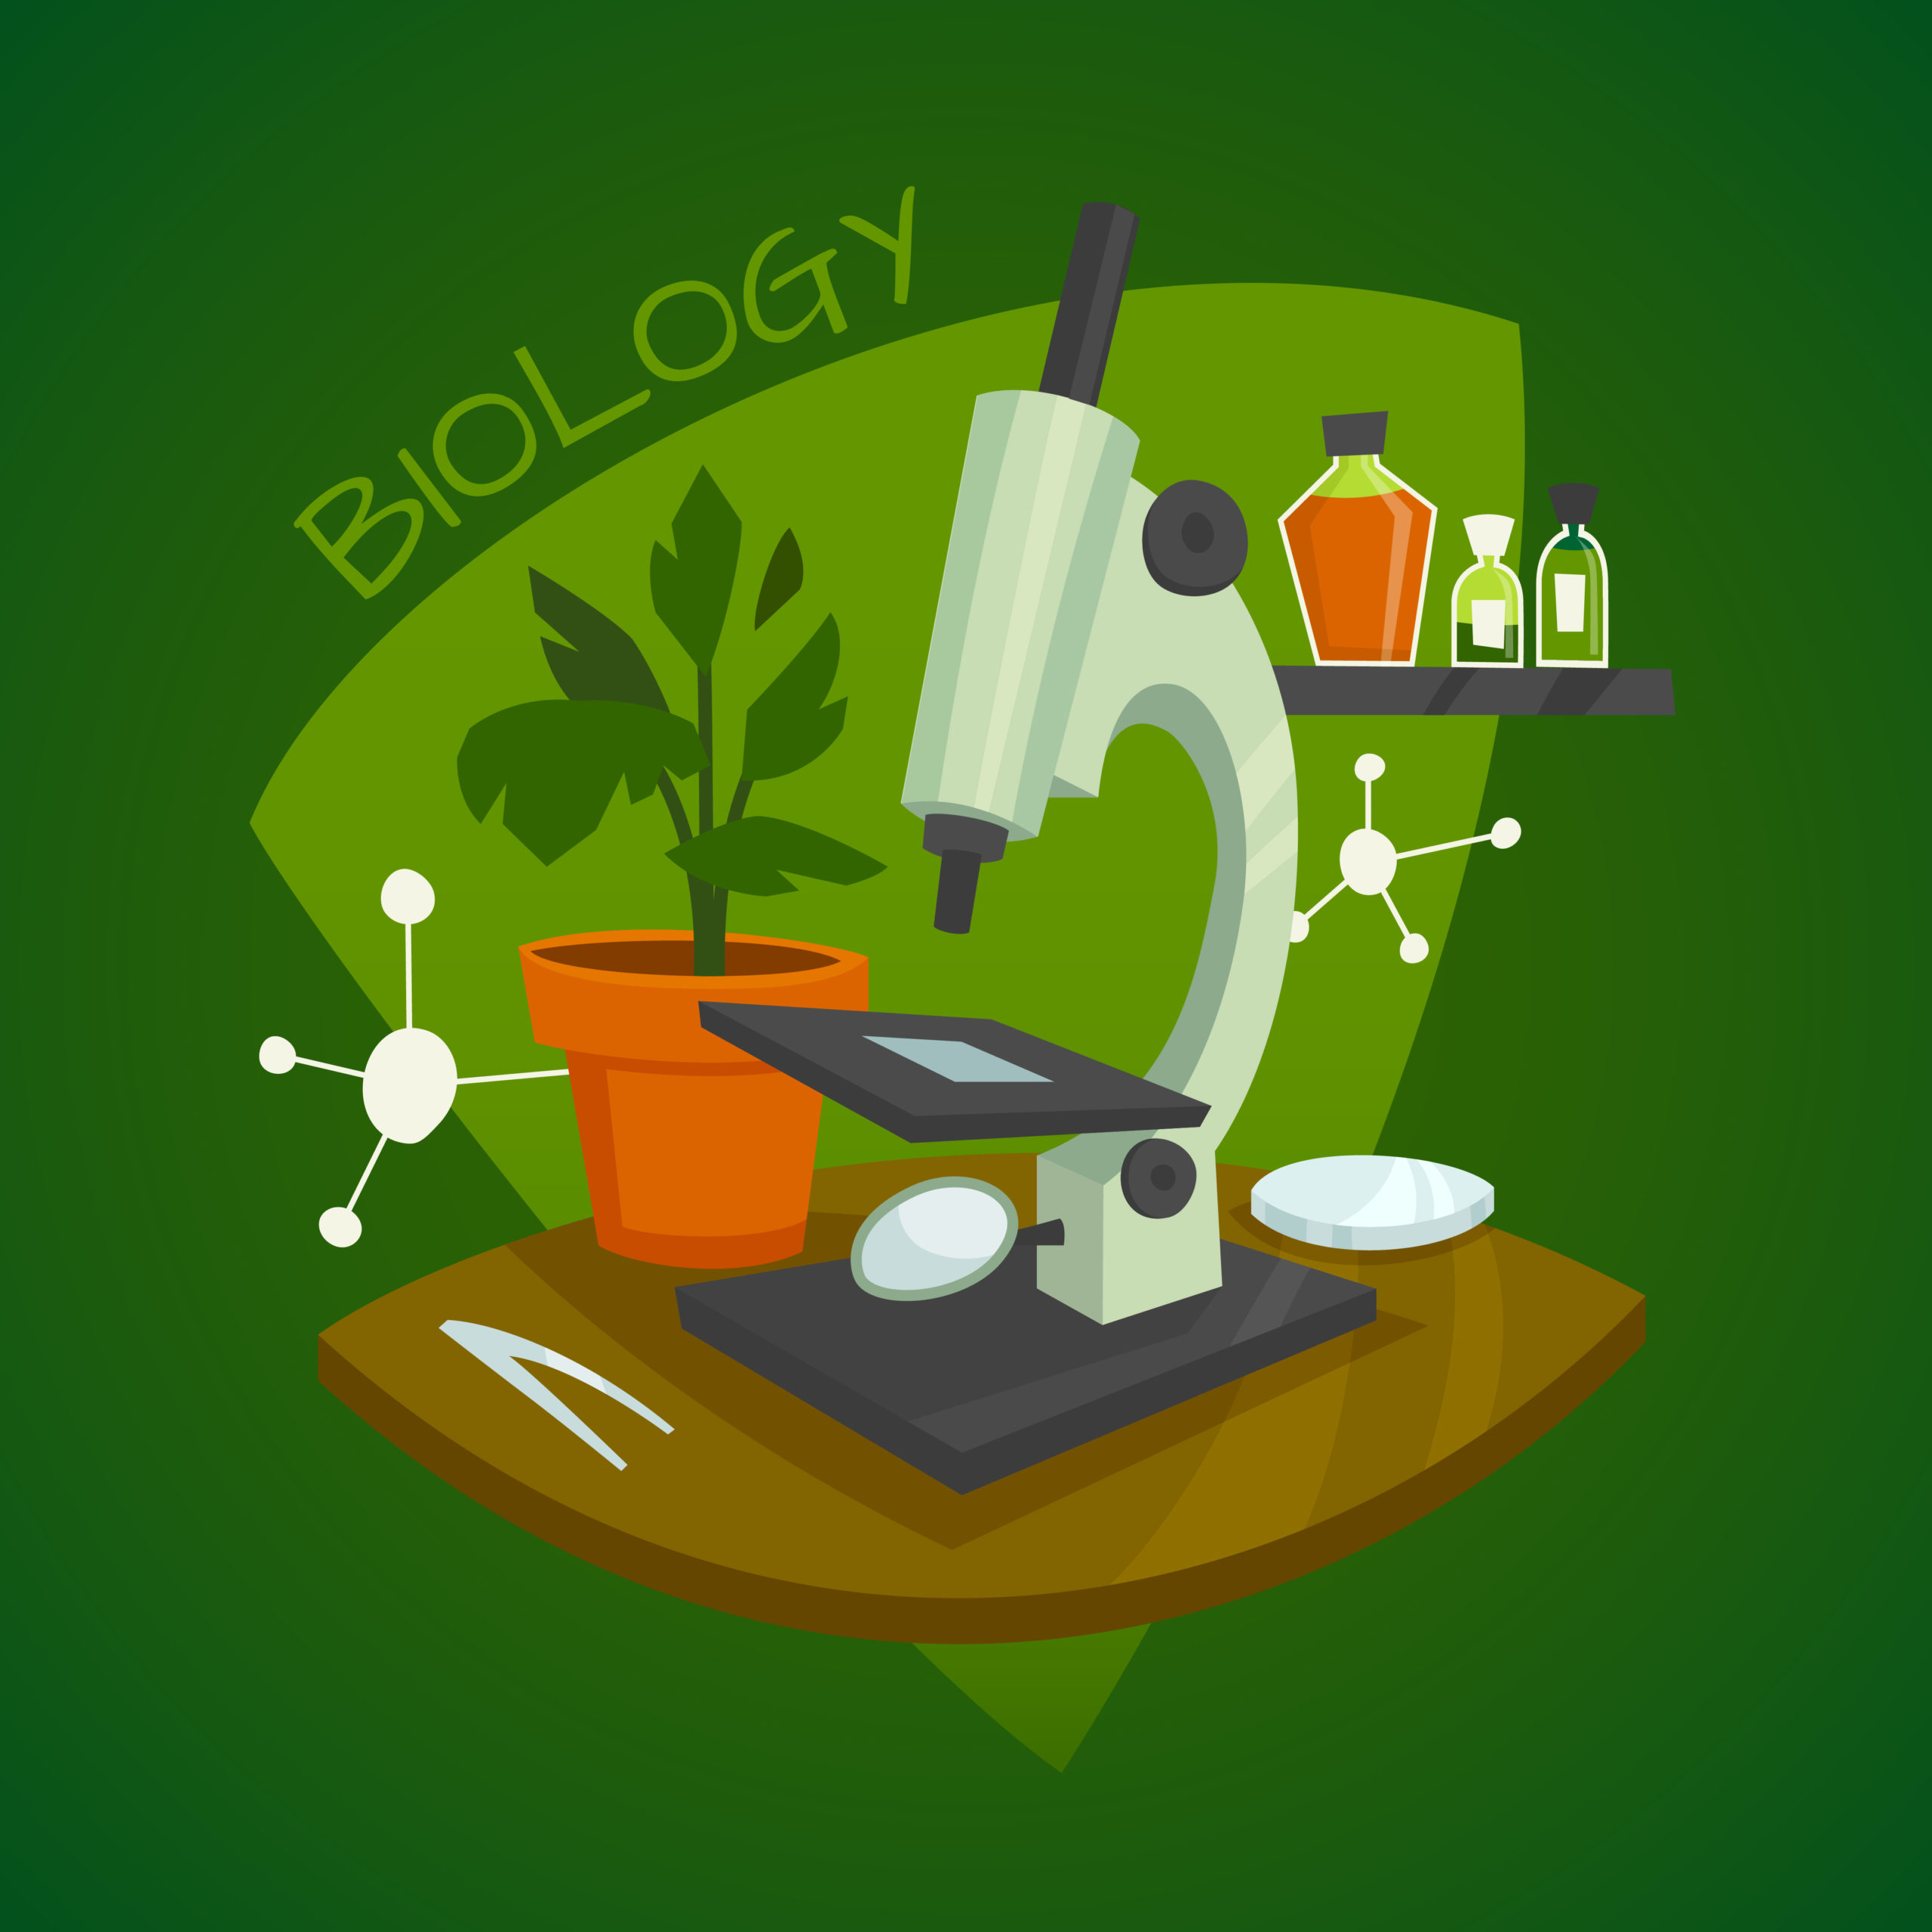 Conquer Your Biology Exam With Expert Online Support: Take My Online Biology Exam With Confidence